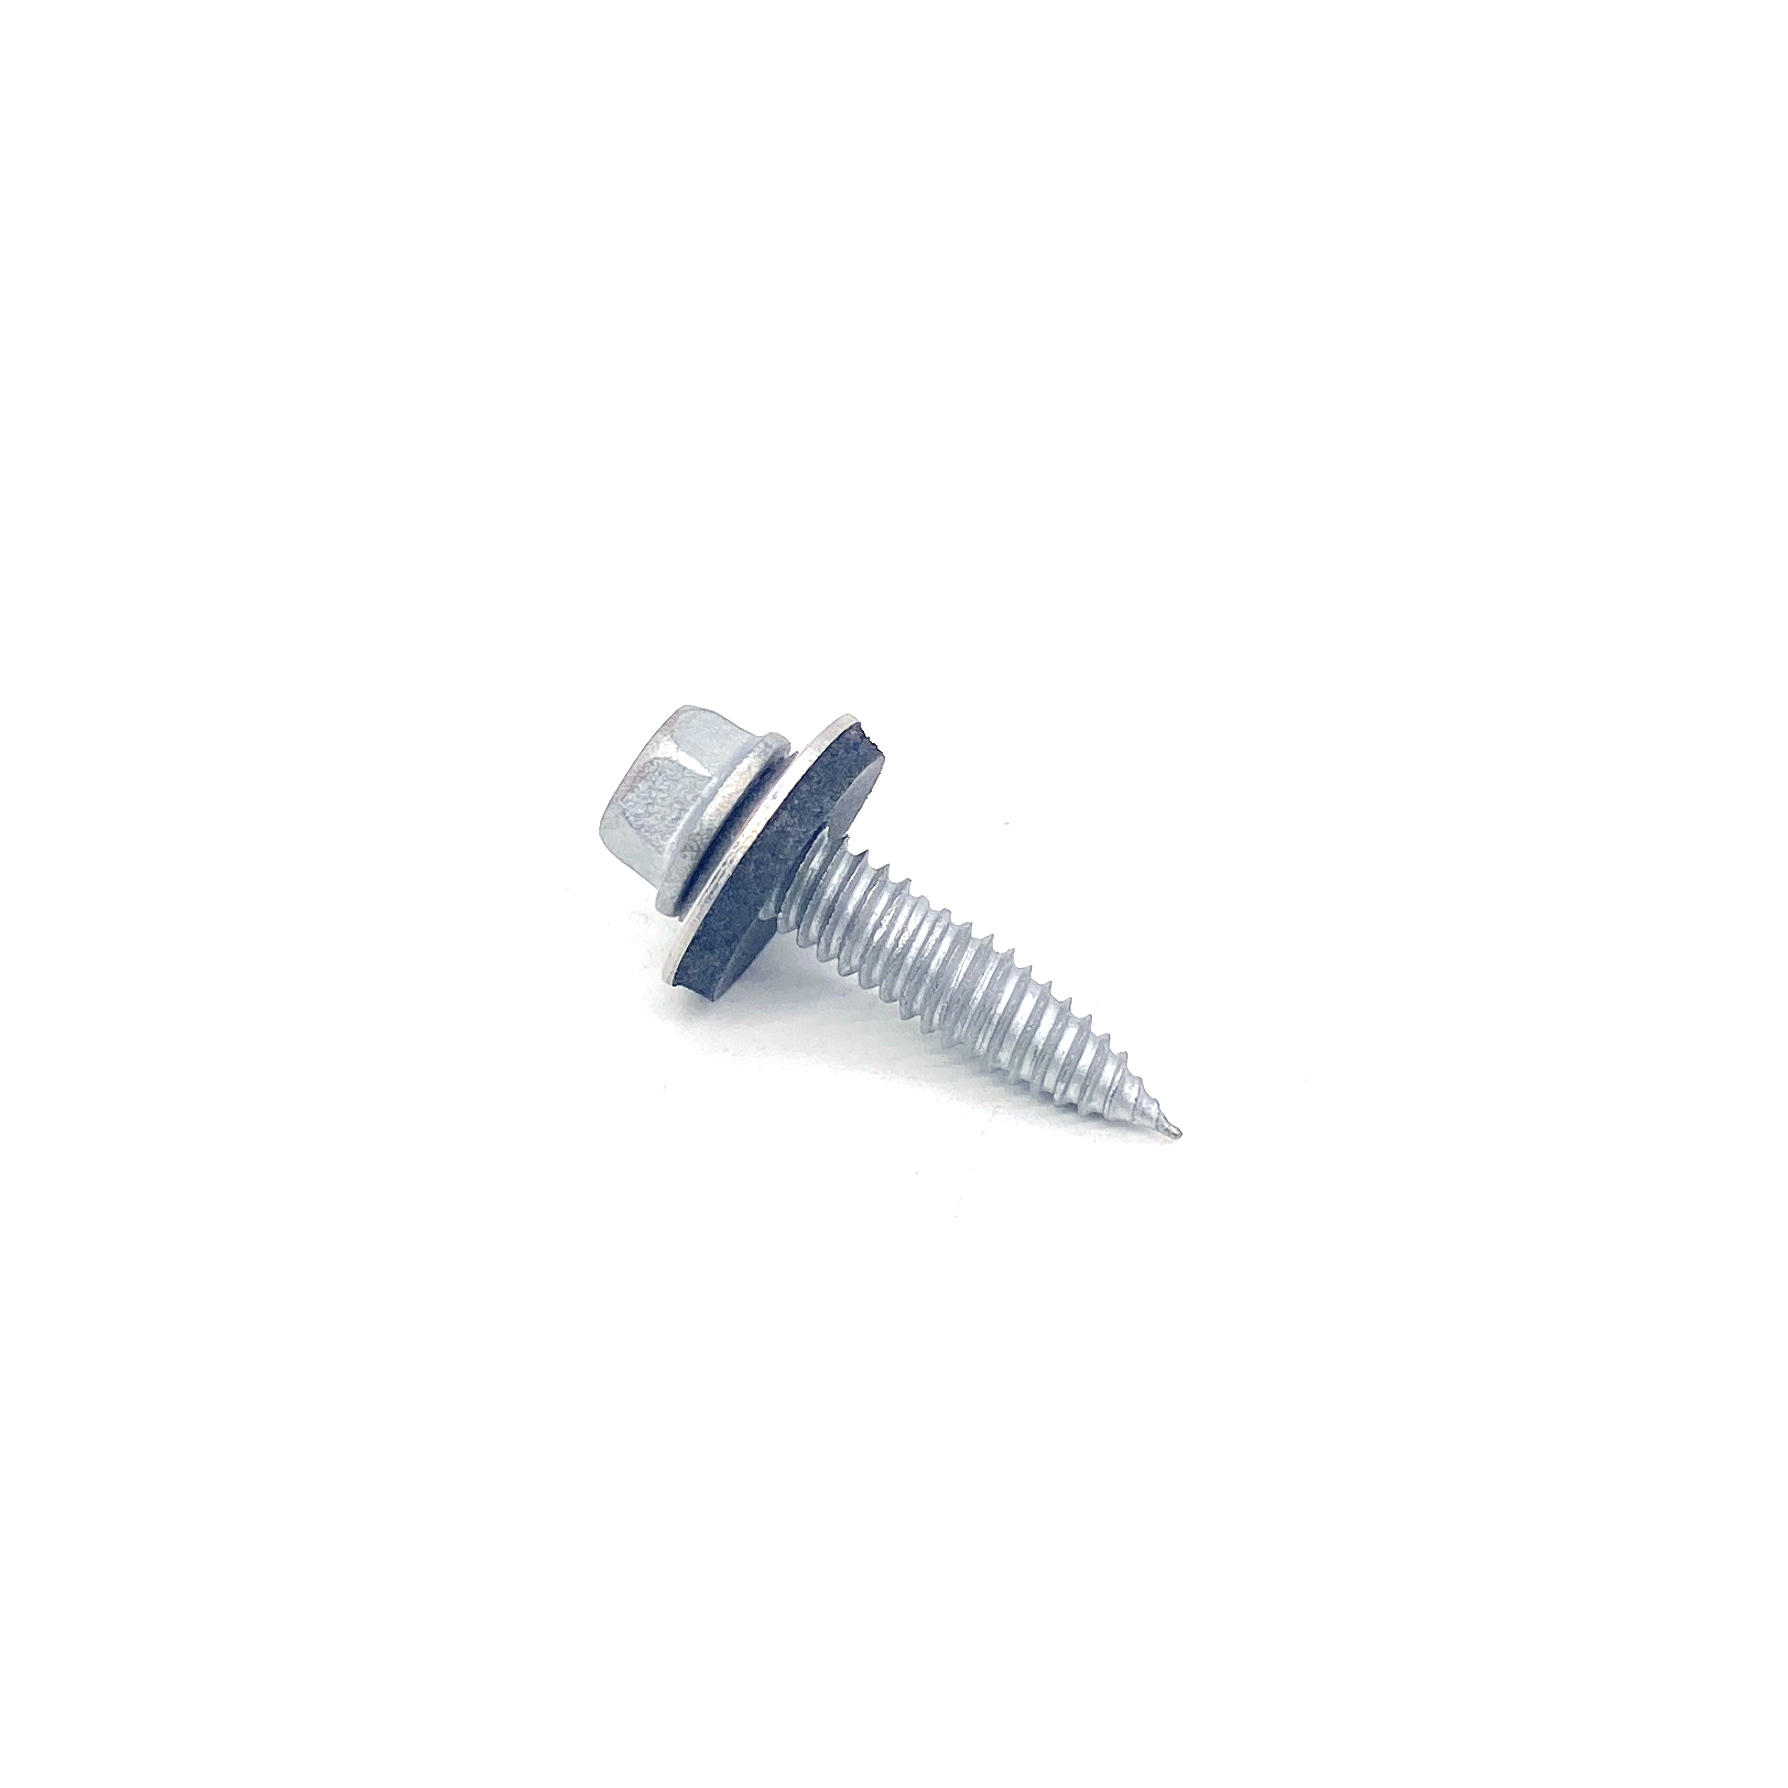 Stainless Steel 316+Scm 435 Compound Hex Head Composite Self Tapping Bi-Metal Screw